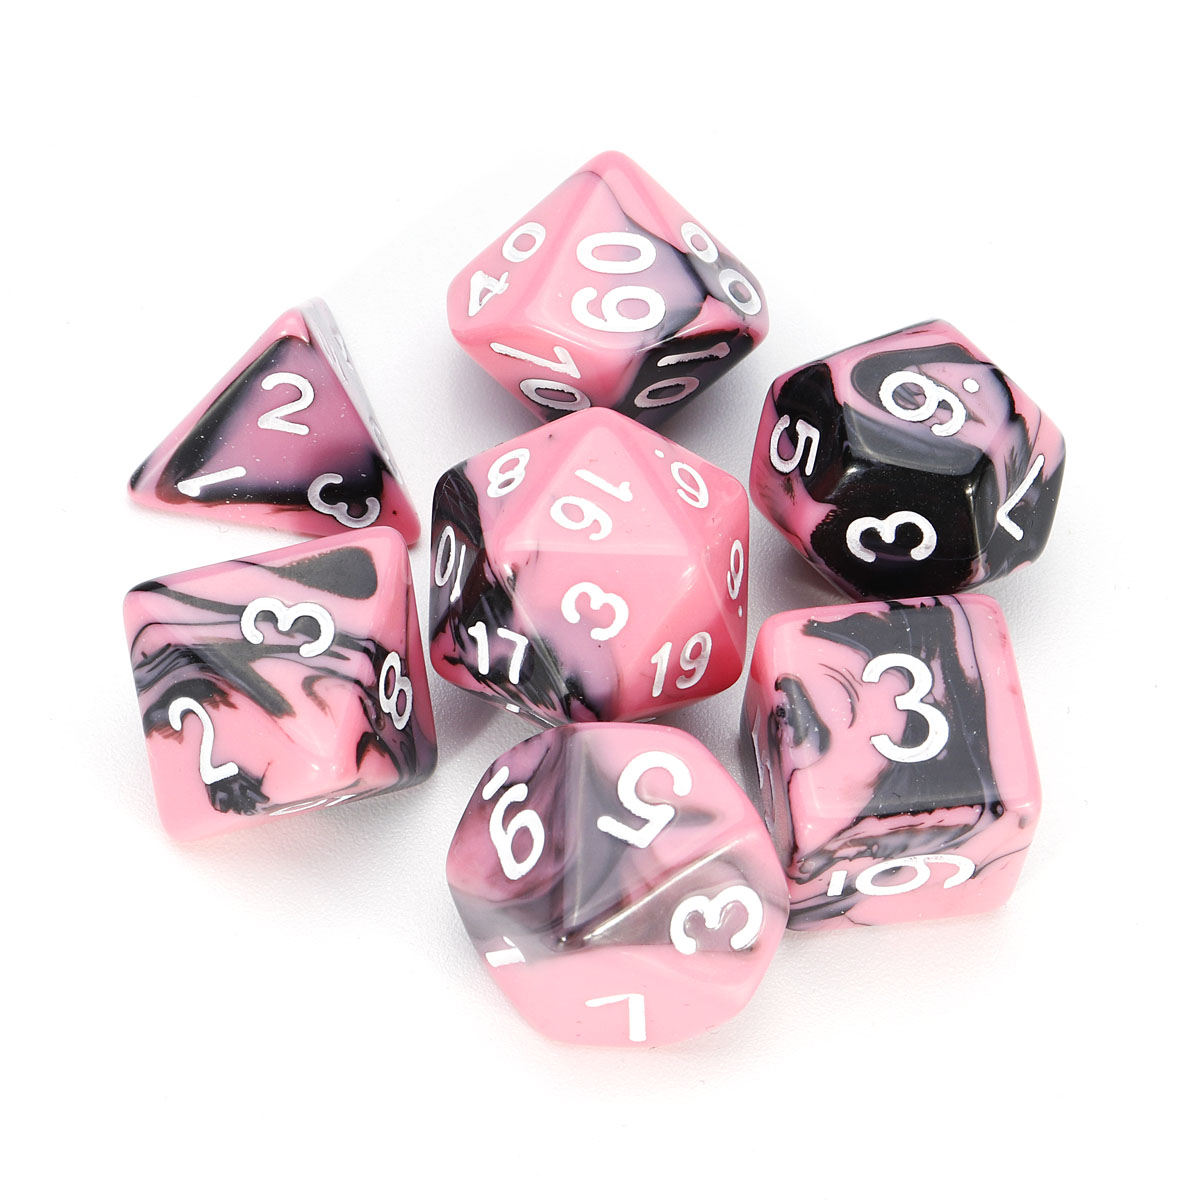 7Pcs-Polyhedral-Dices-Double-Color-For-Role-Playing-Game-Dice-Set-With-Storage-Bag-1422309-5